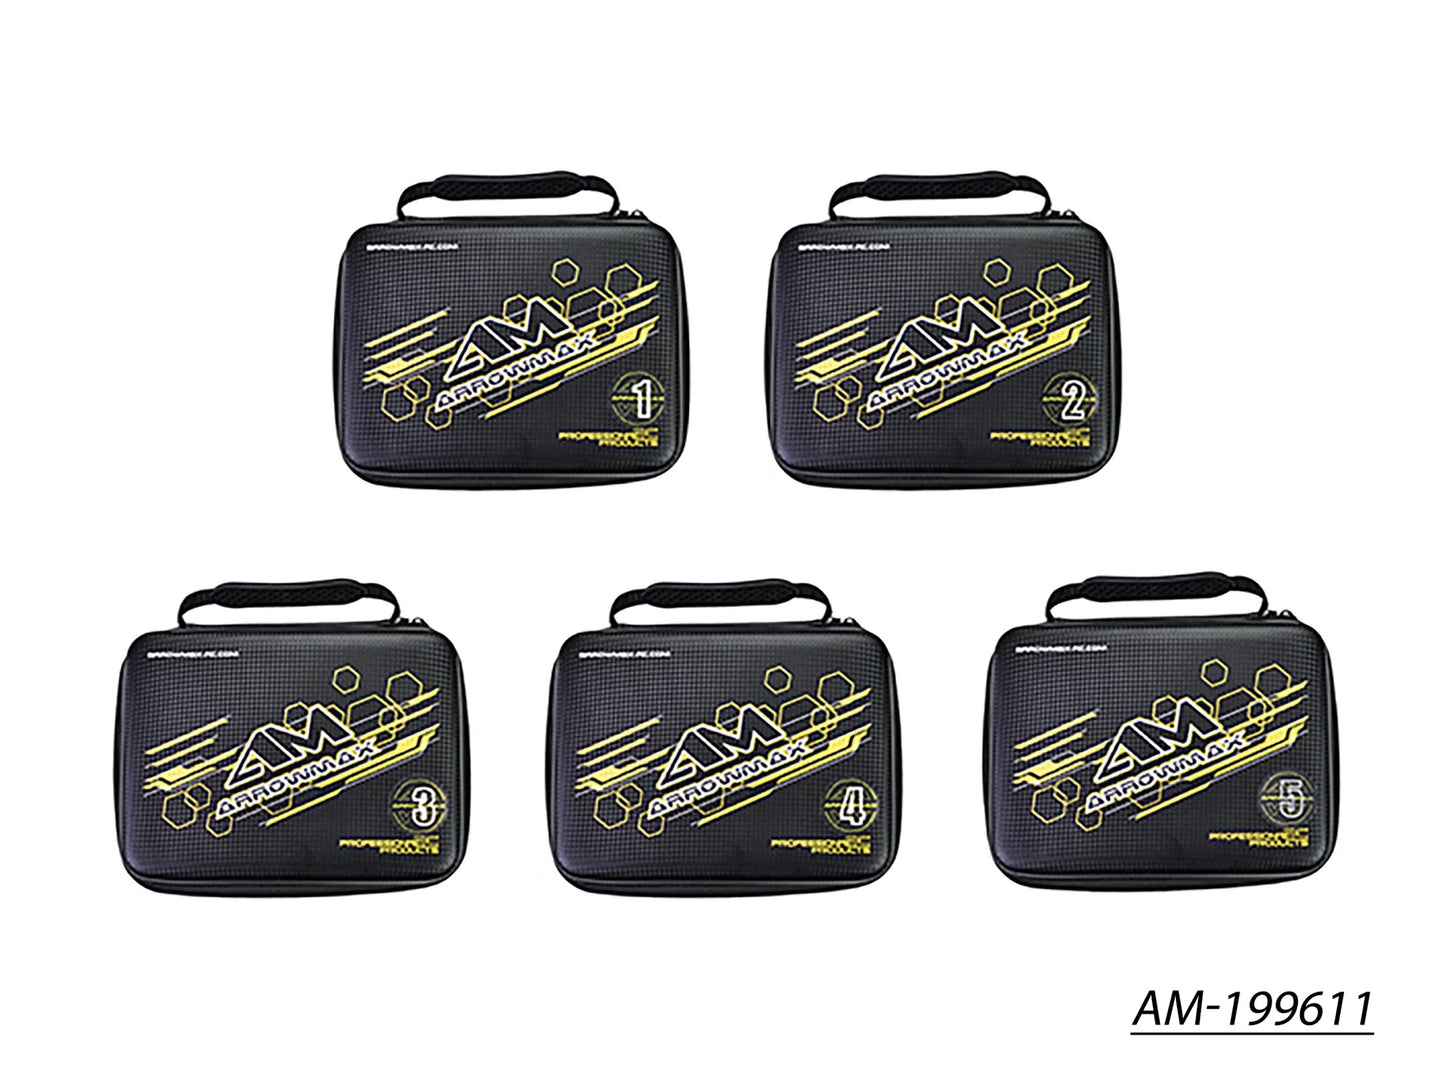 AM Accessories Bag (240 x 180 x 85mm) Set - 5 Bag With Bumbers (AM-199611)